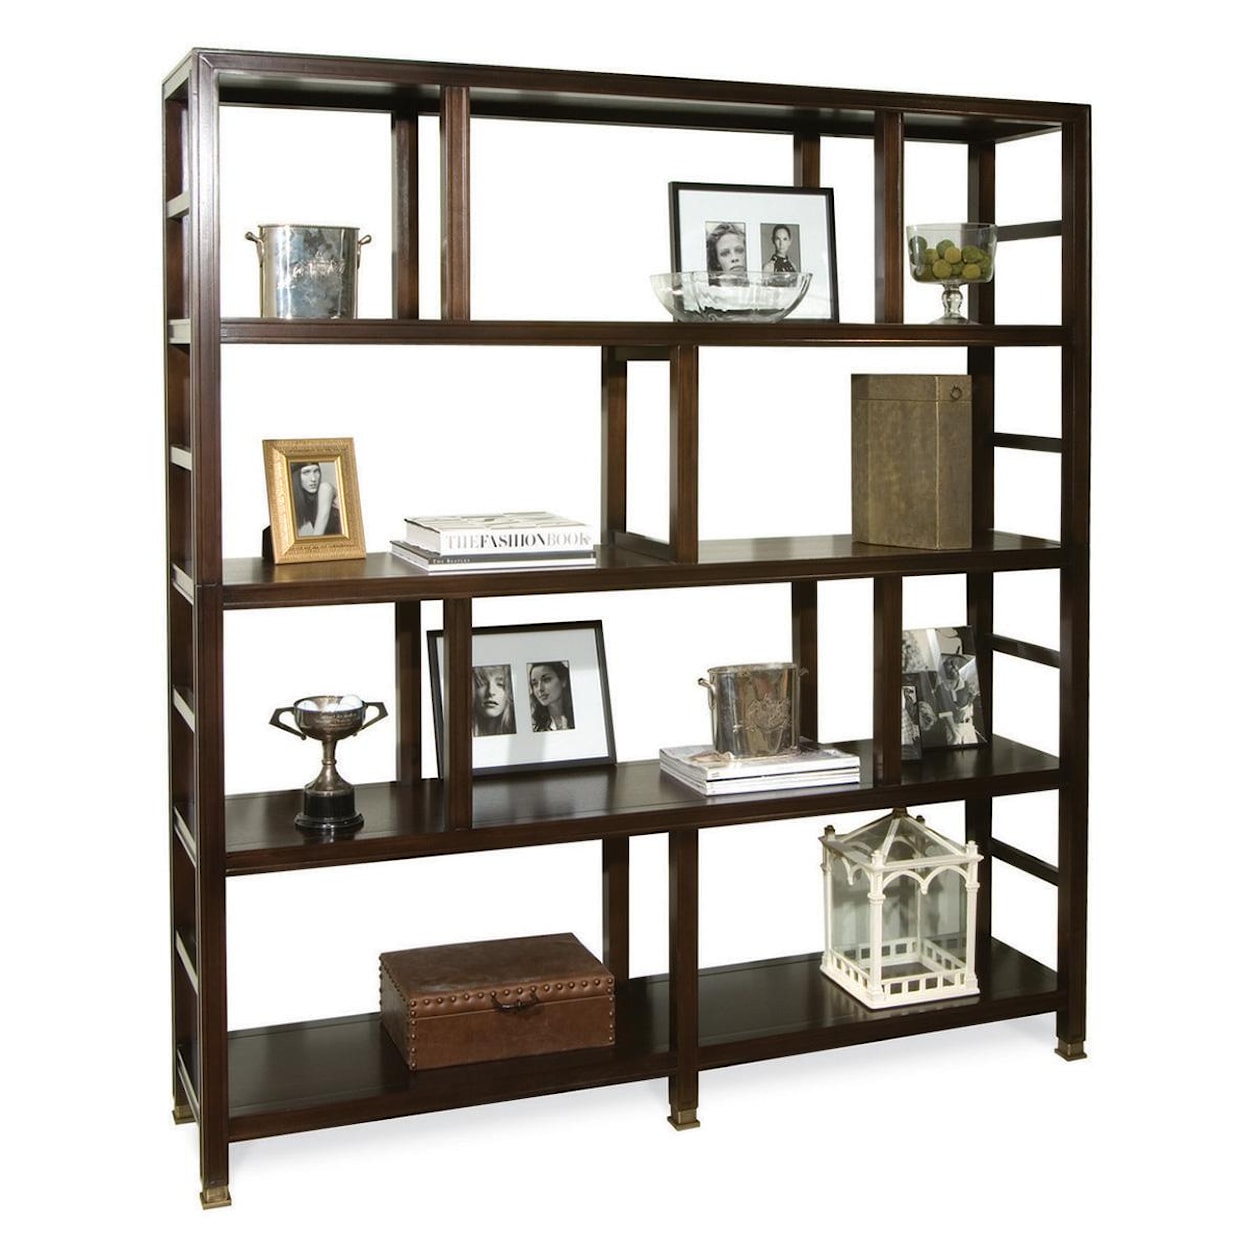 Vanguard Furniture Accent and Entertainment Chests and Tables Bookcase